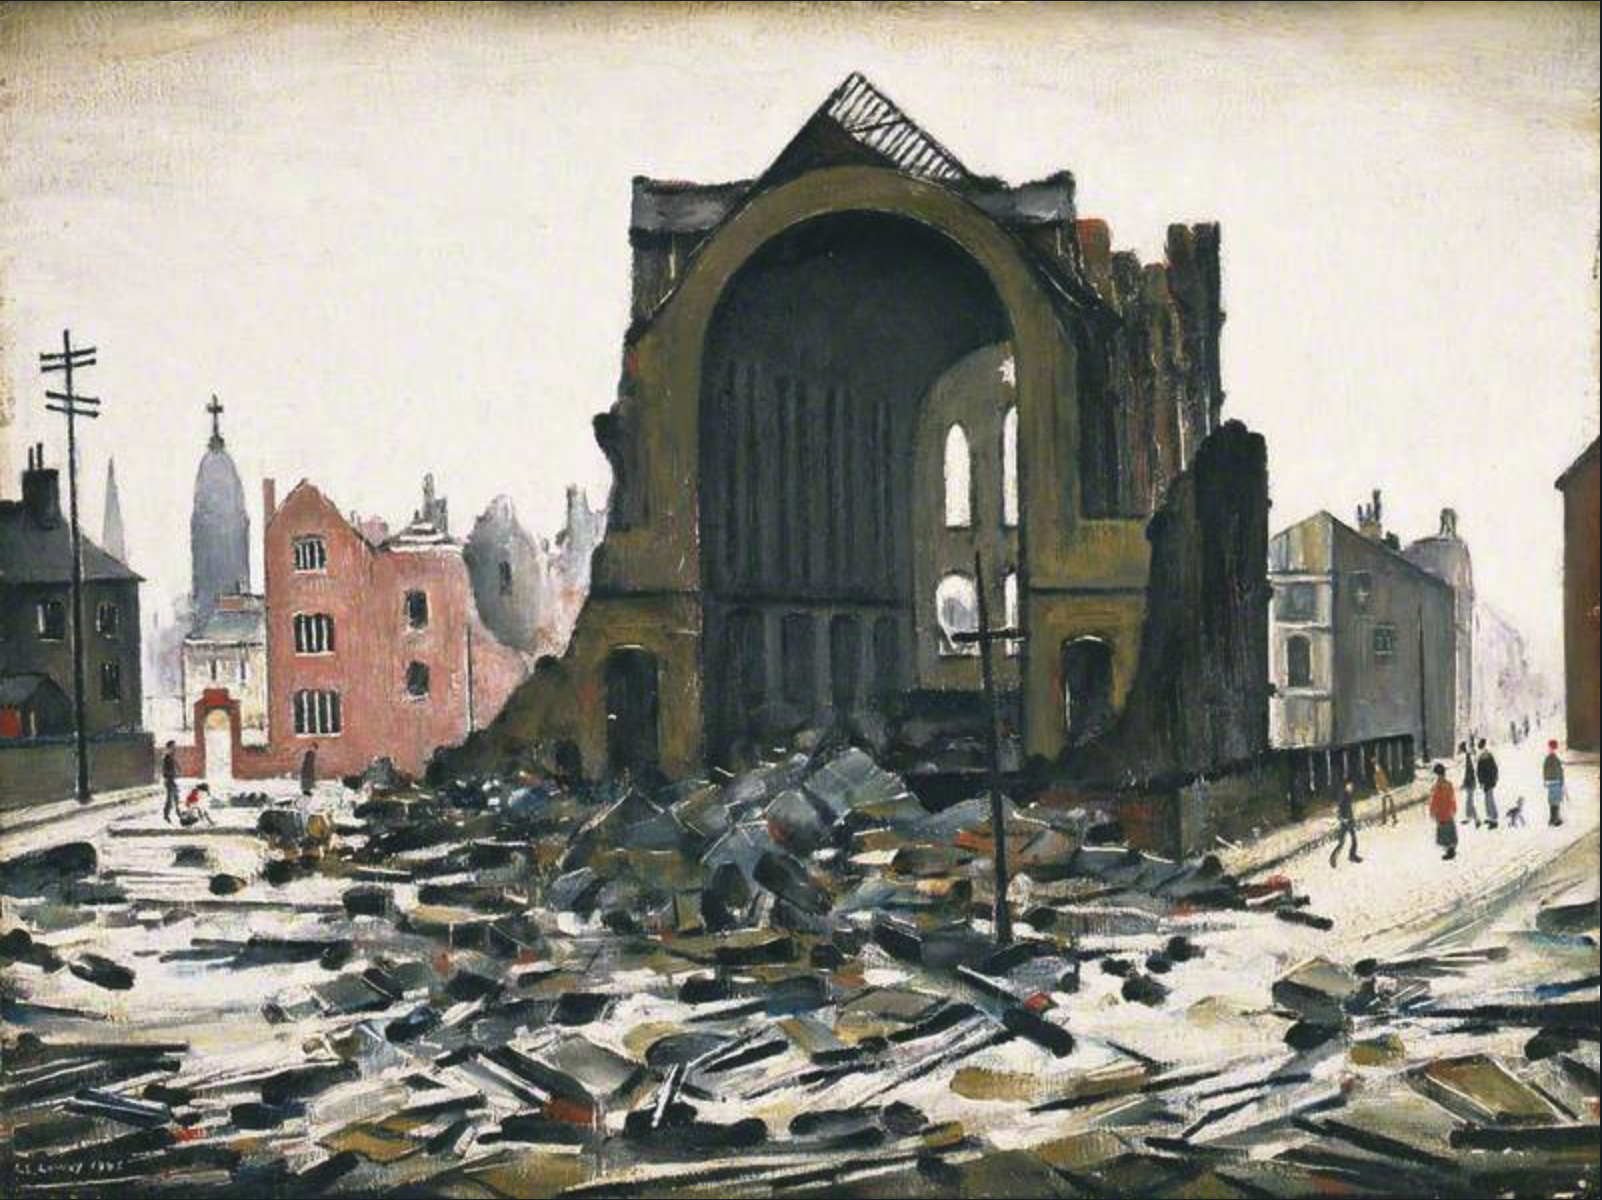 St Augustine's Church, Manchester (1945) by Laurence Stephen Lowry (1887 - 1976), English artist.